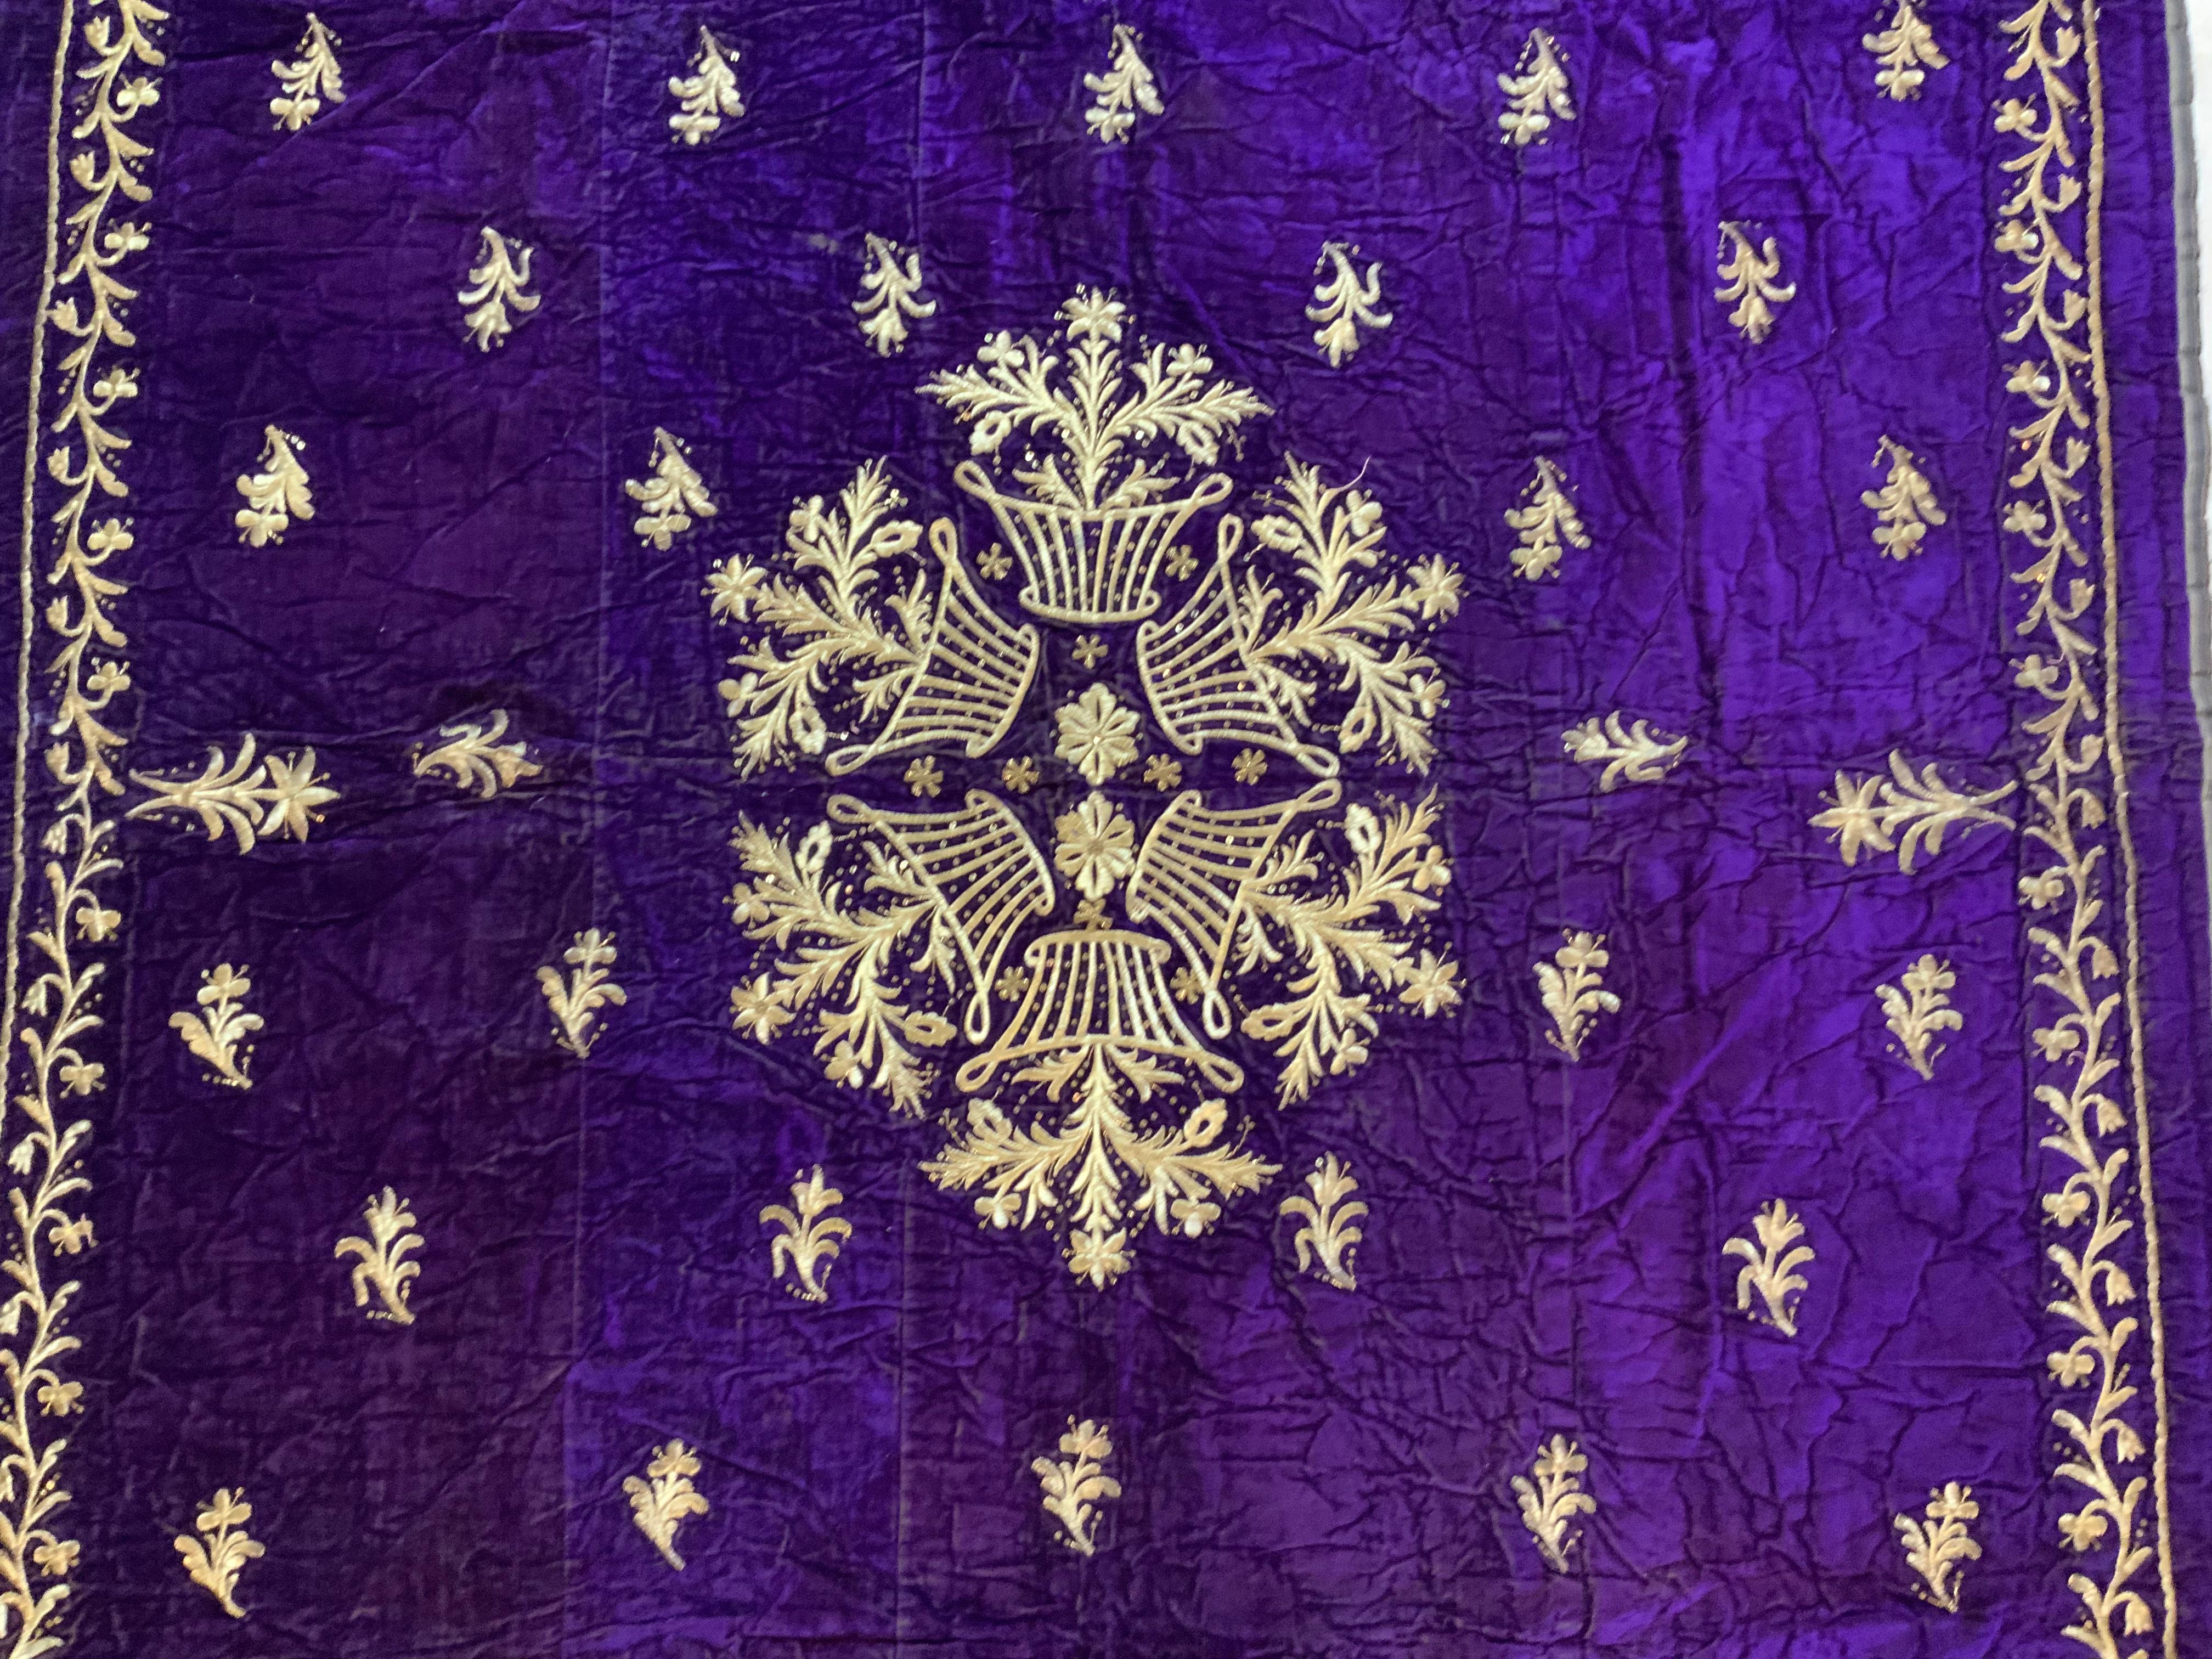 Antique Velvet and Gold Embroidery Textile In Good Condition For Sale In Delray Beach, FL